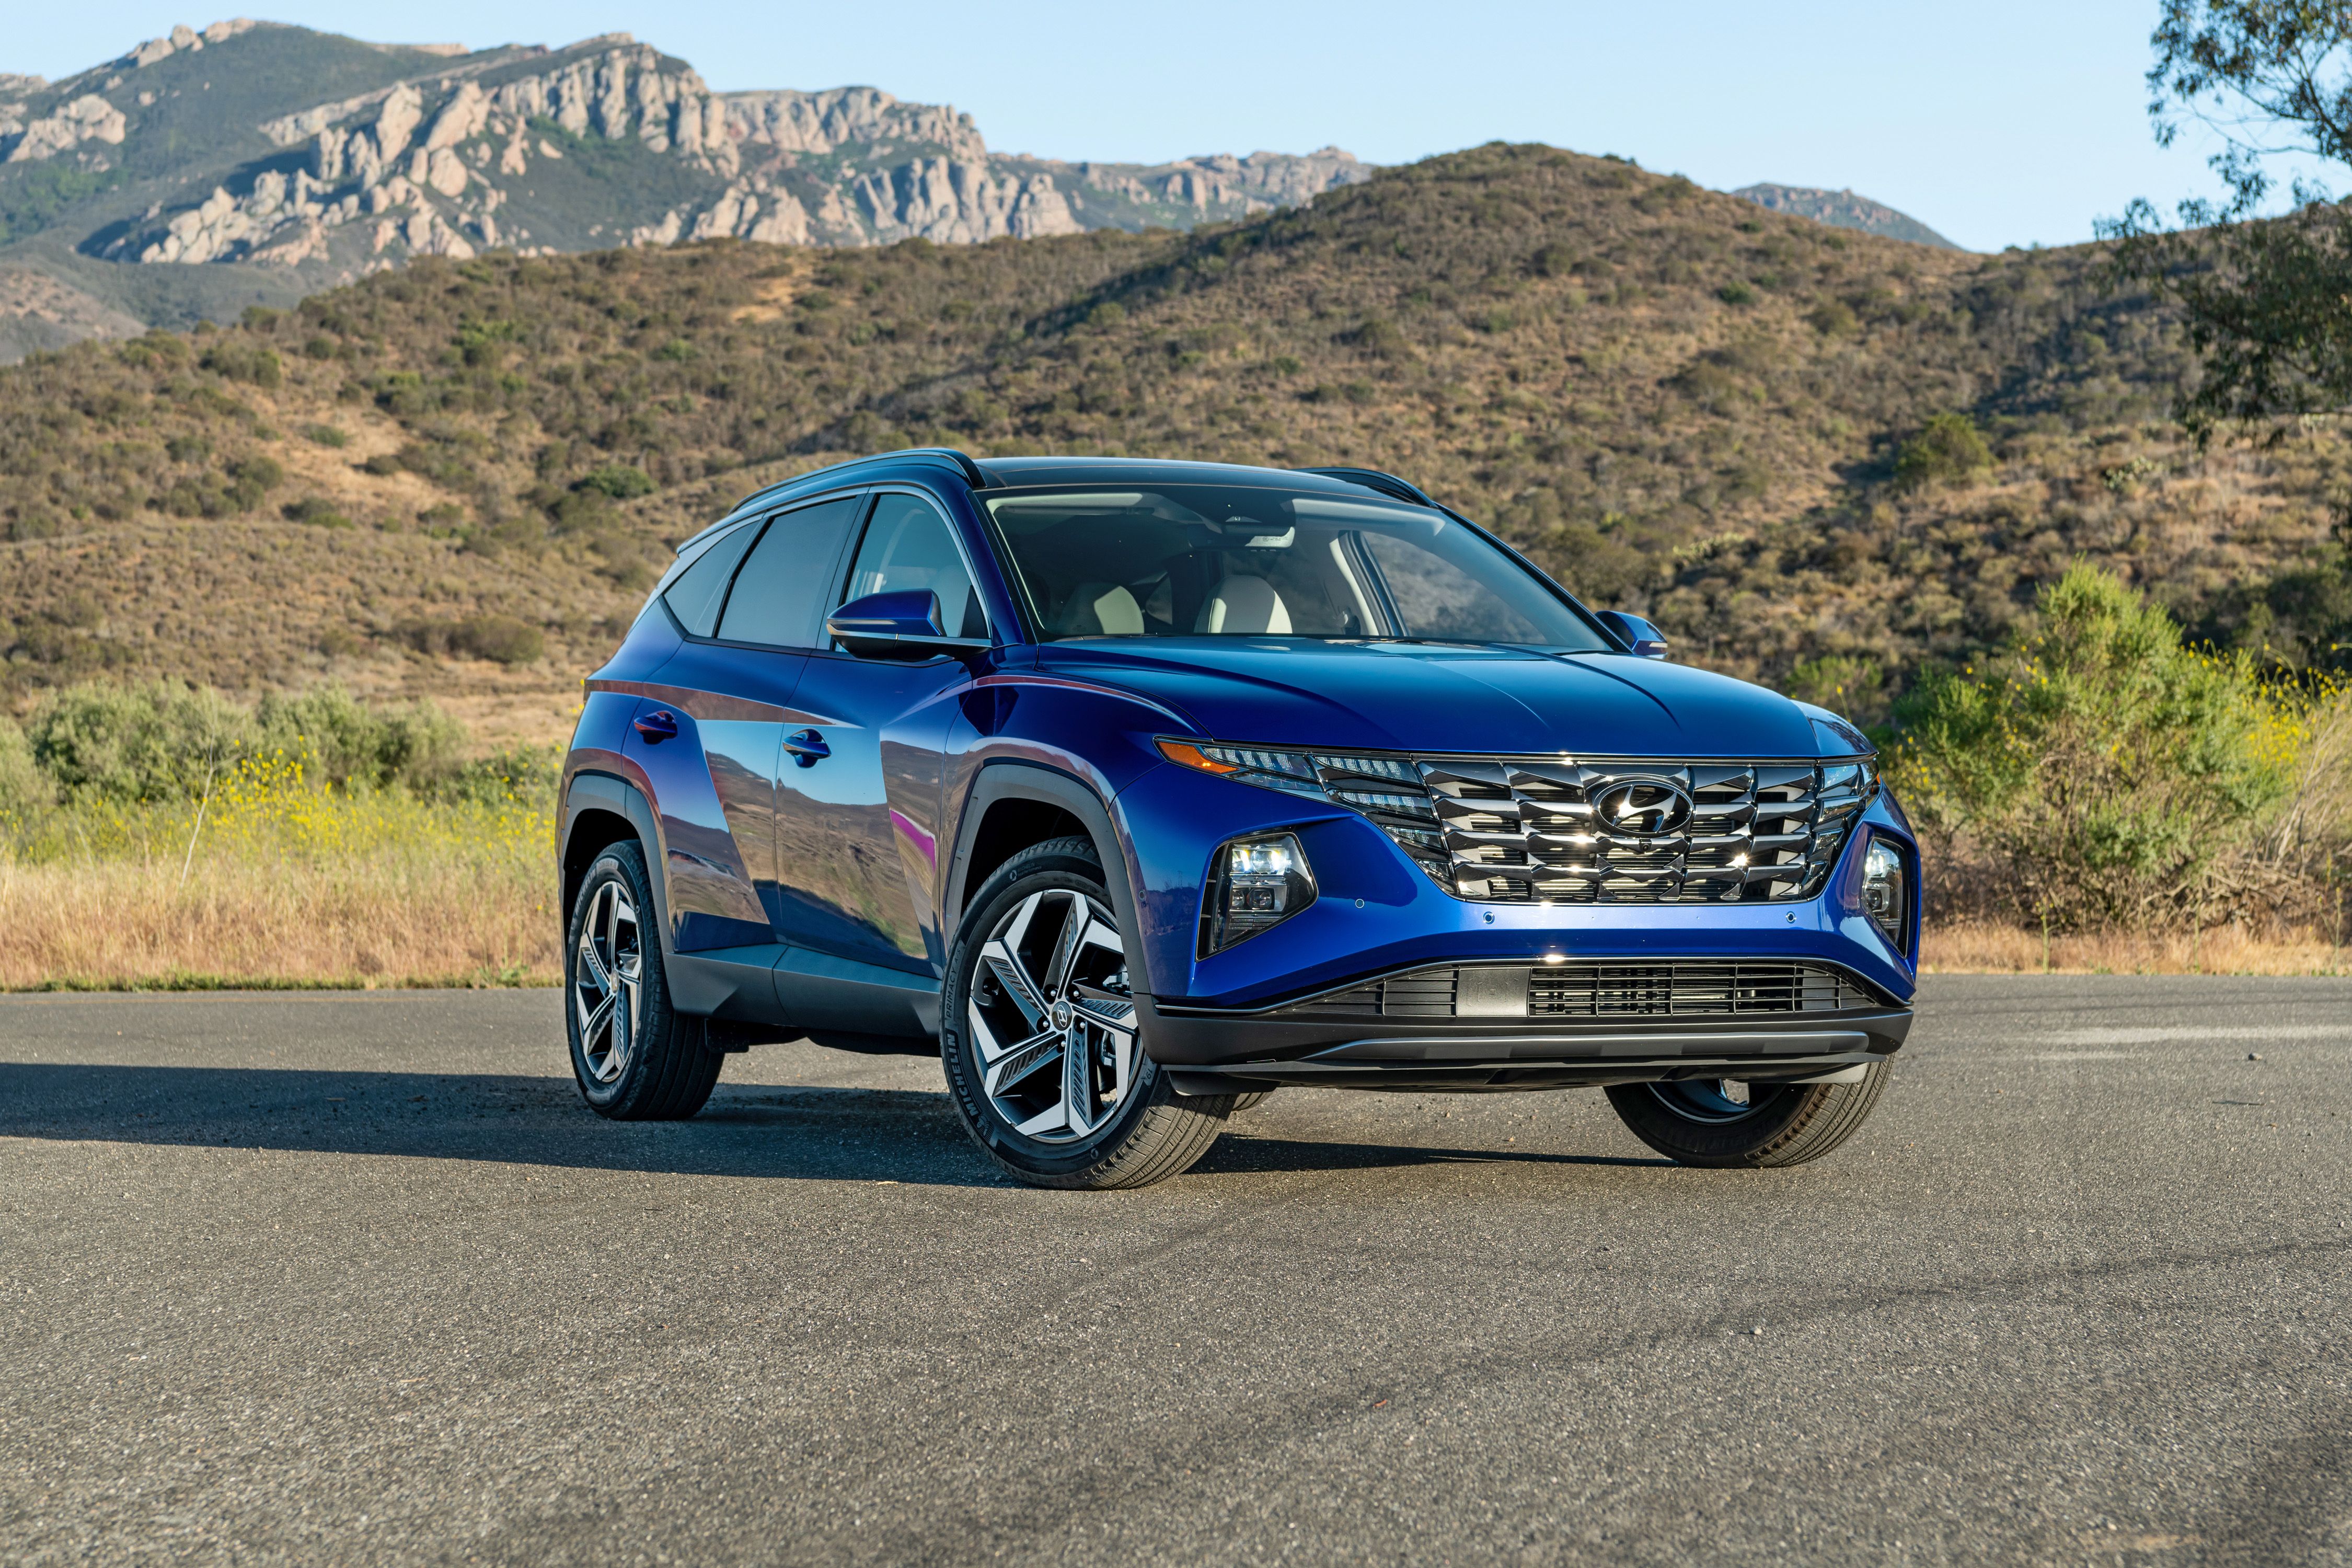 2020 Hyundai Tucson Review, Pricing, and Specs